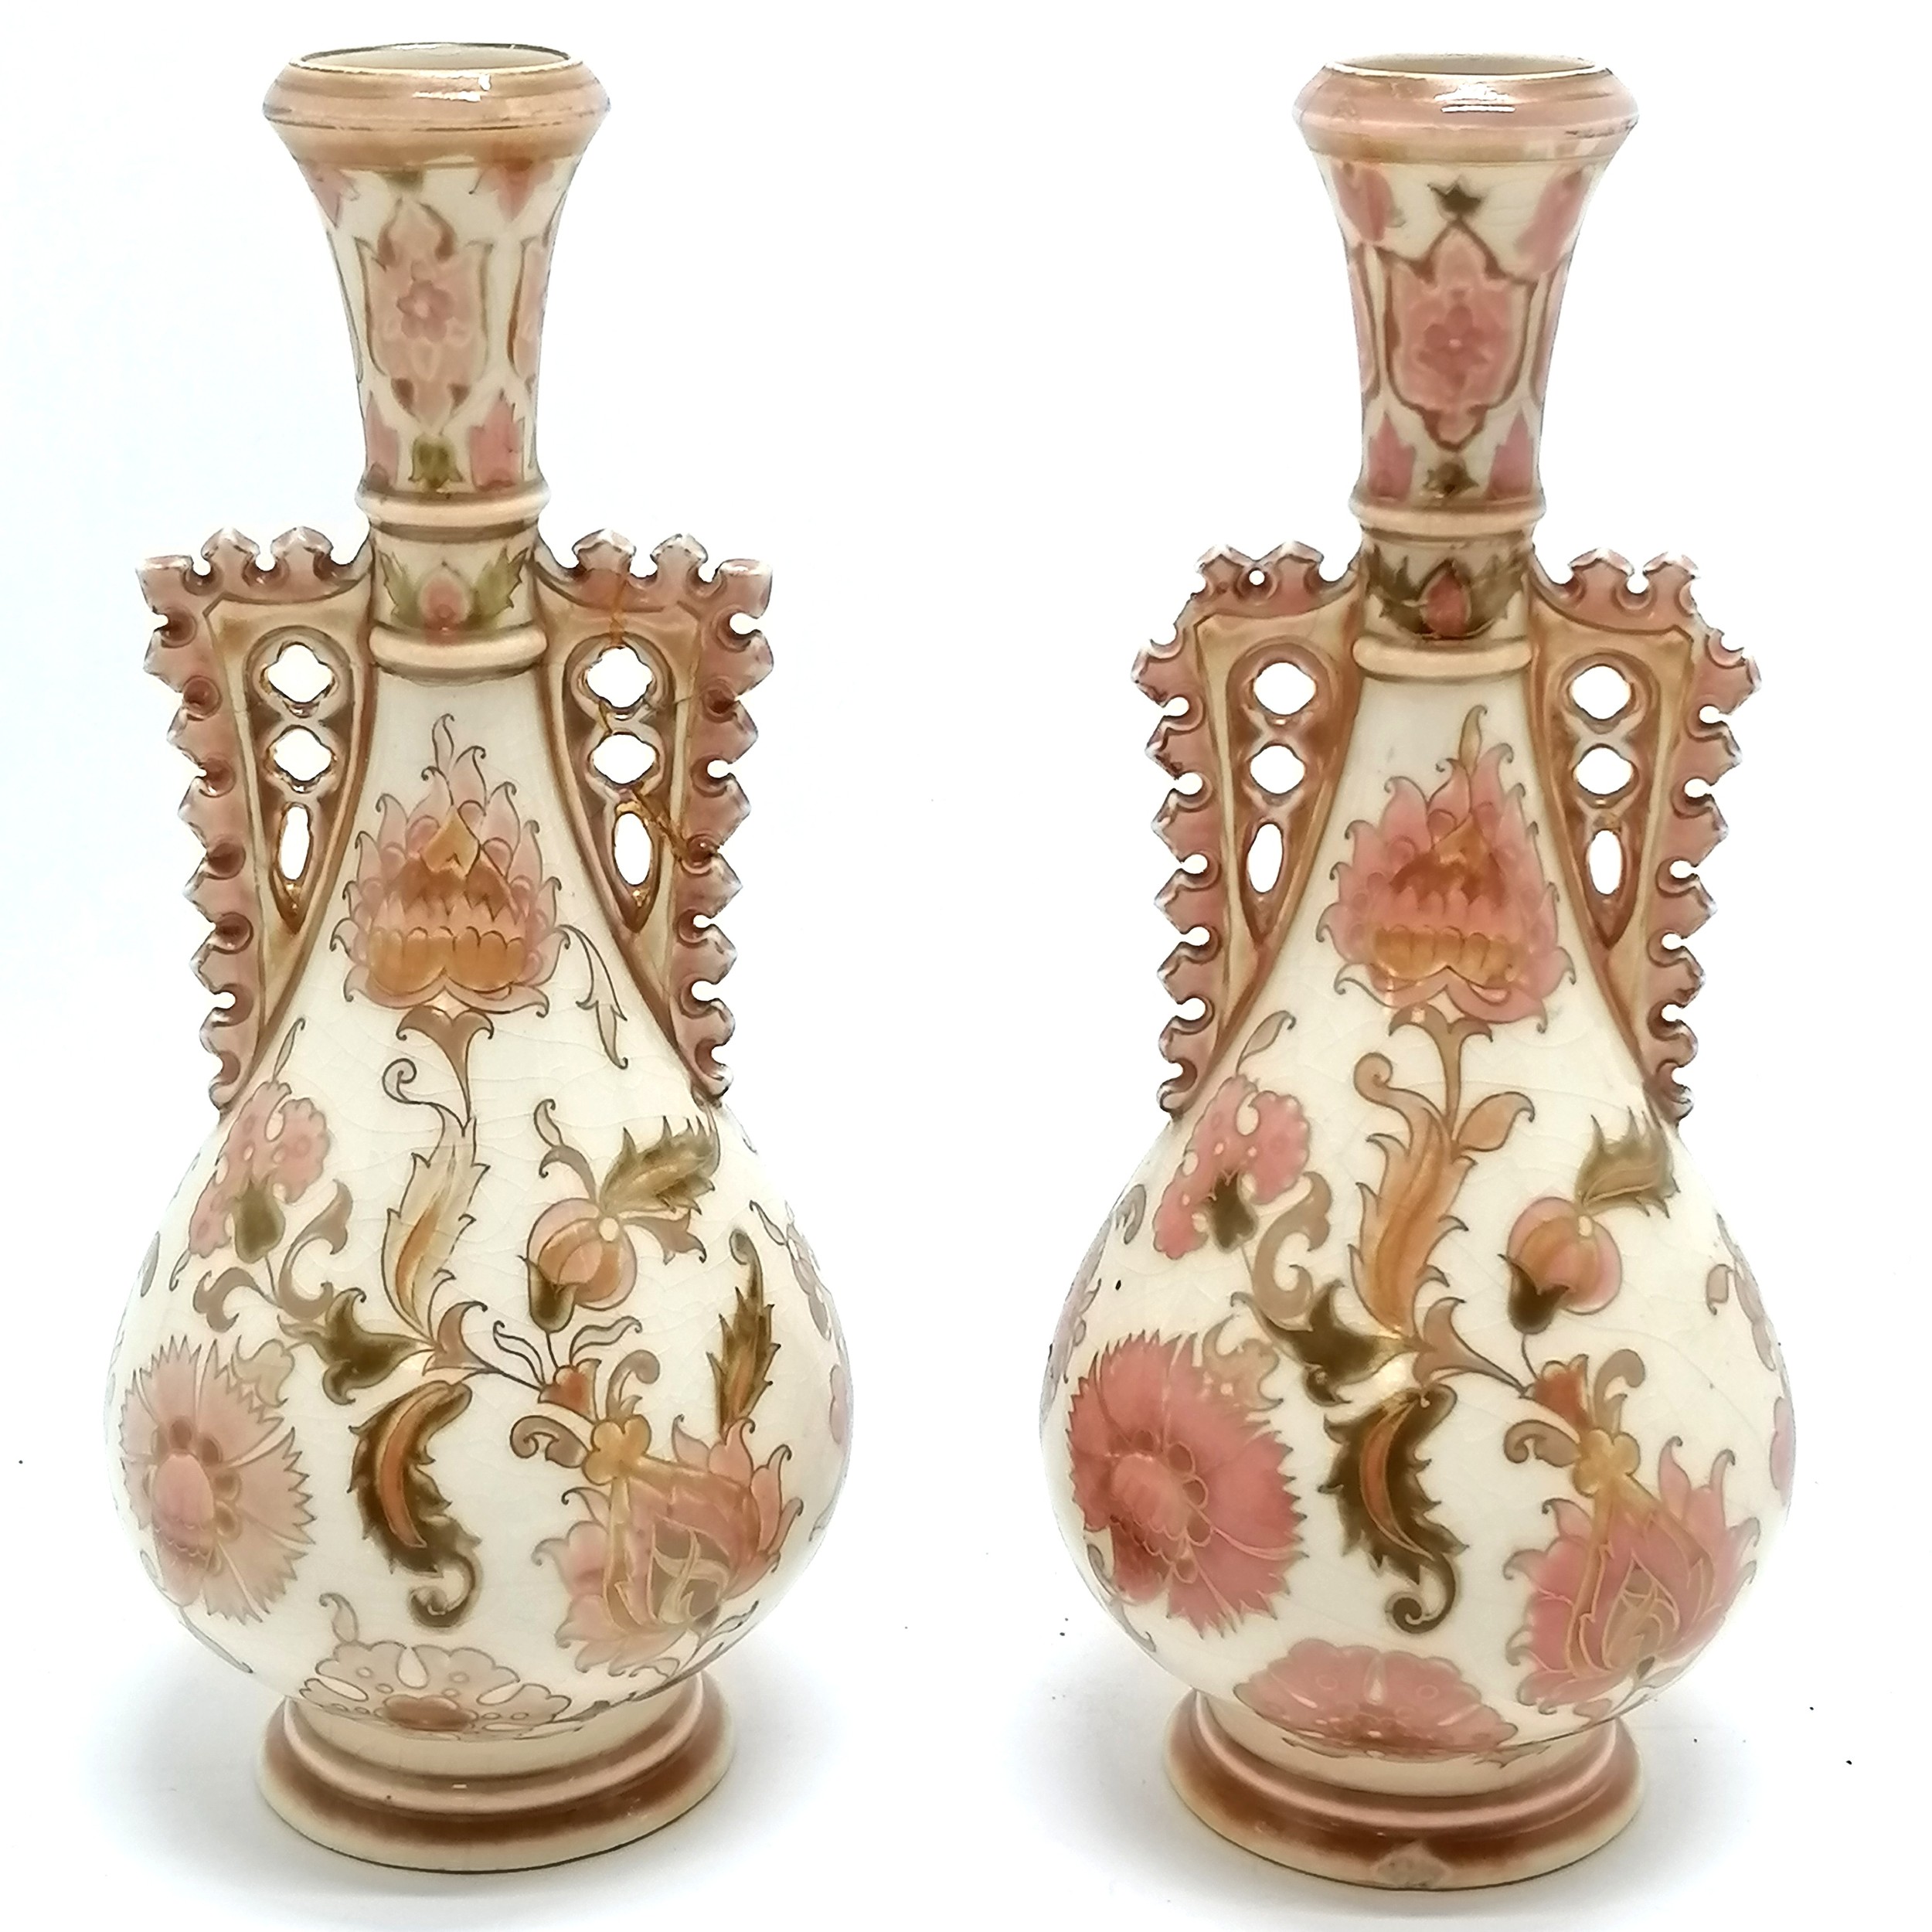 Zsolnay (Pecs, Hungary) pair of decorative vases - 21cm high & both are a/f